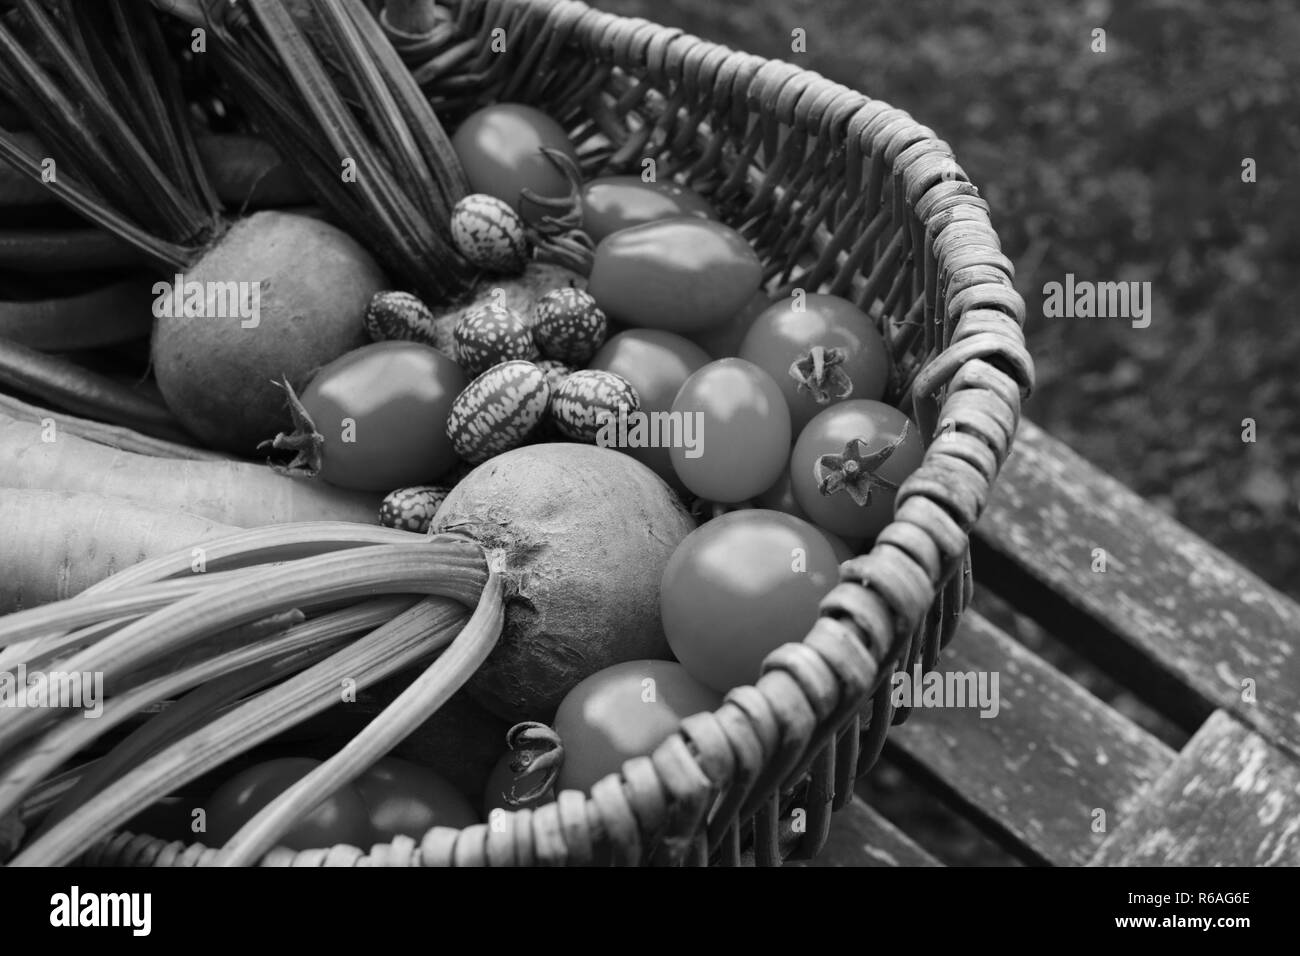 Beetroot, tomatoes, cucamelons and carrots in a wicker basket Stock Photo